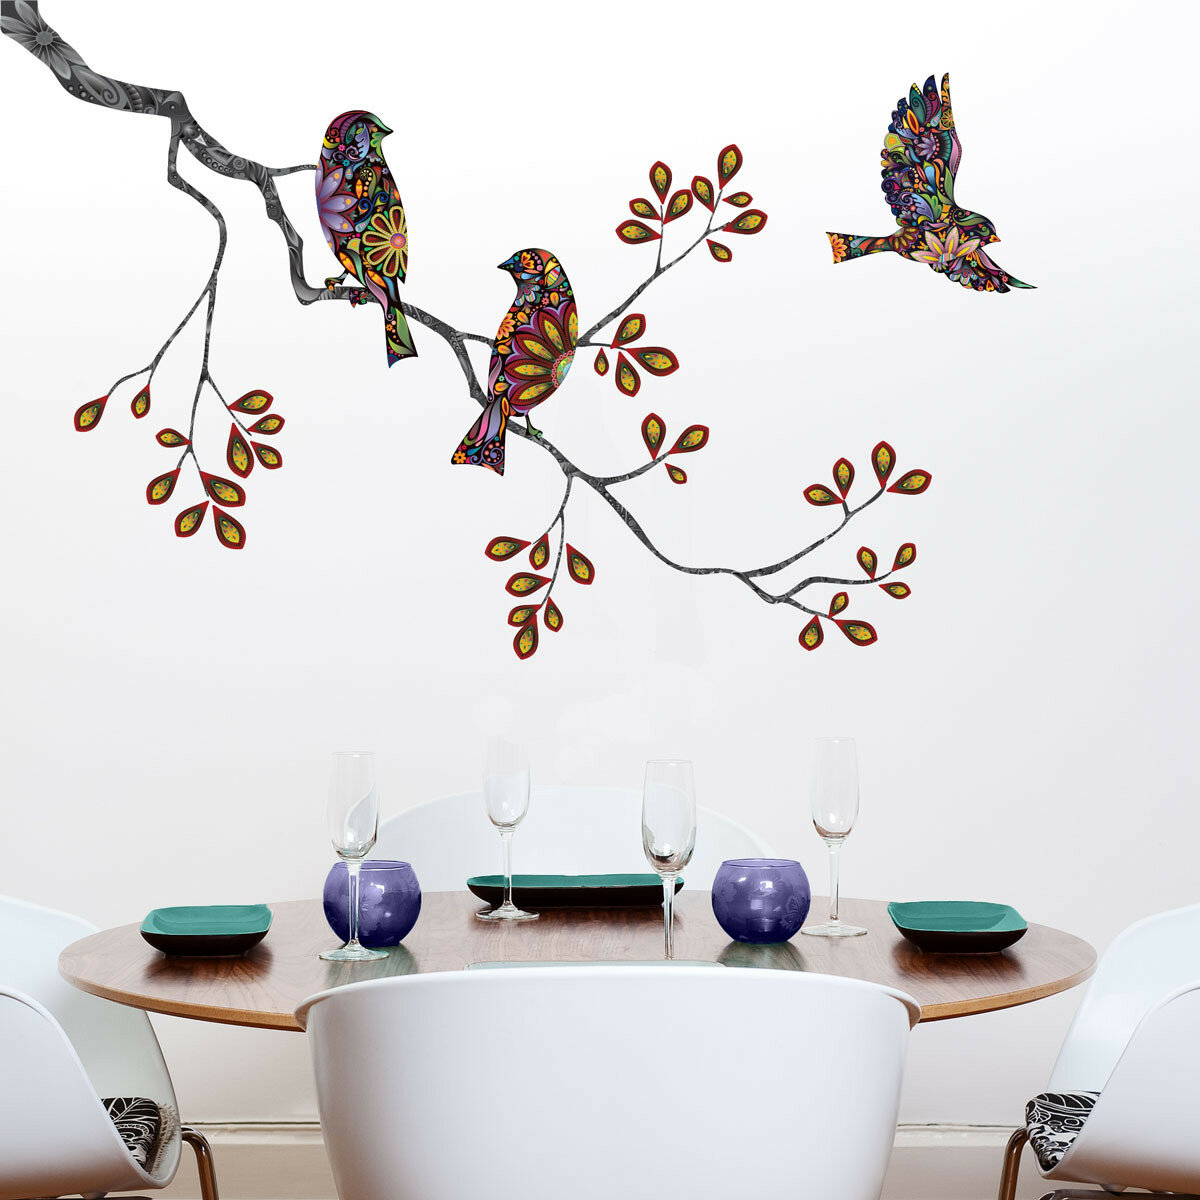 Funny Animals Tree Removable Bedroom Mural Vinyl Wall Sticker Decal Home Decor